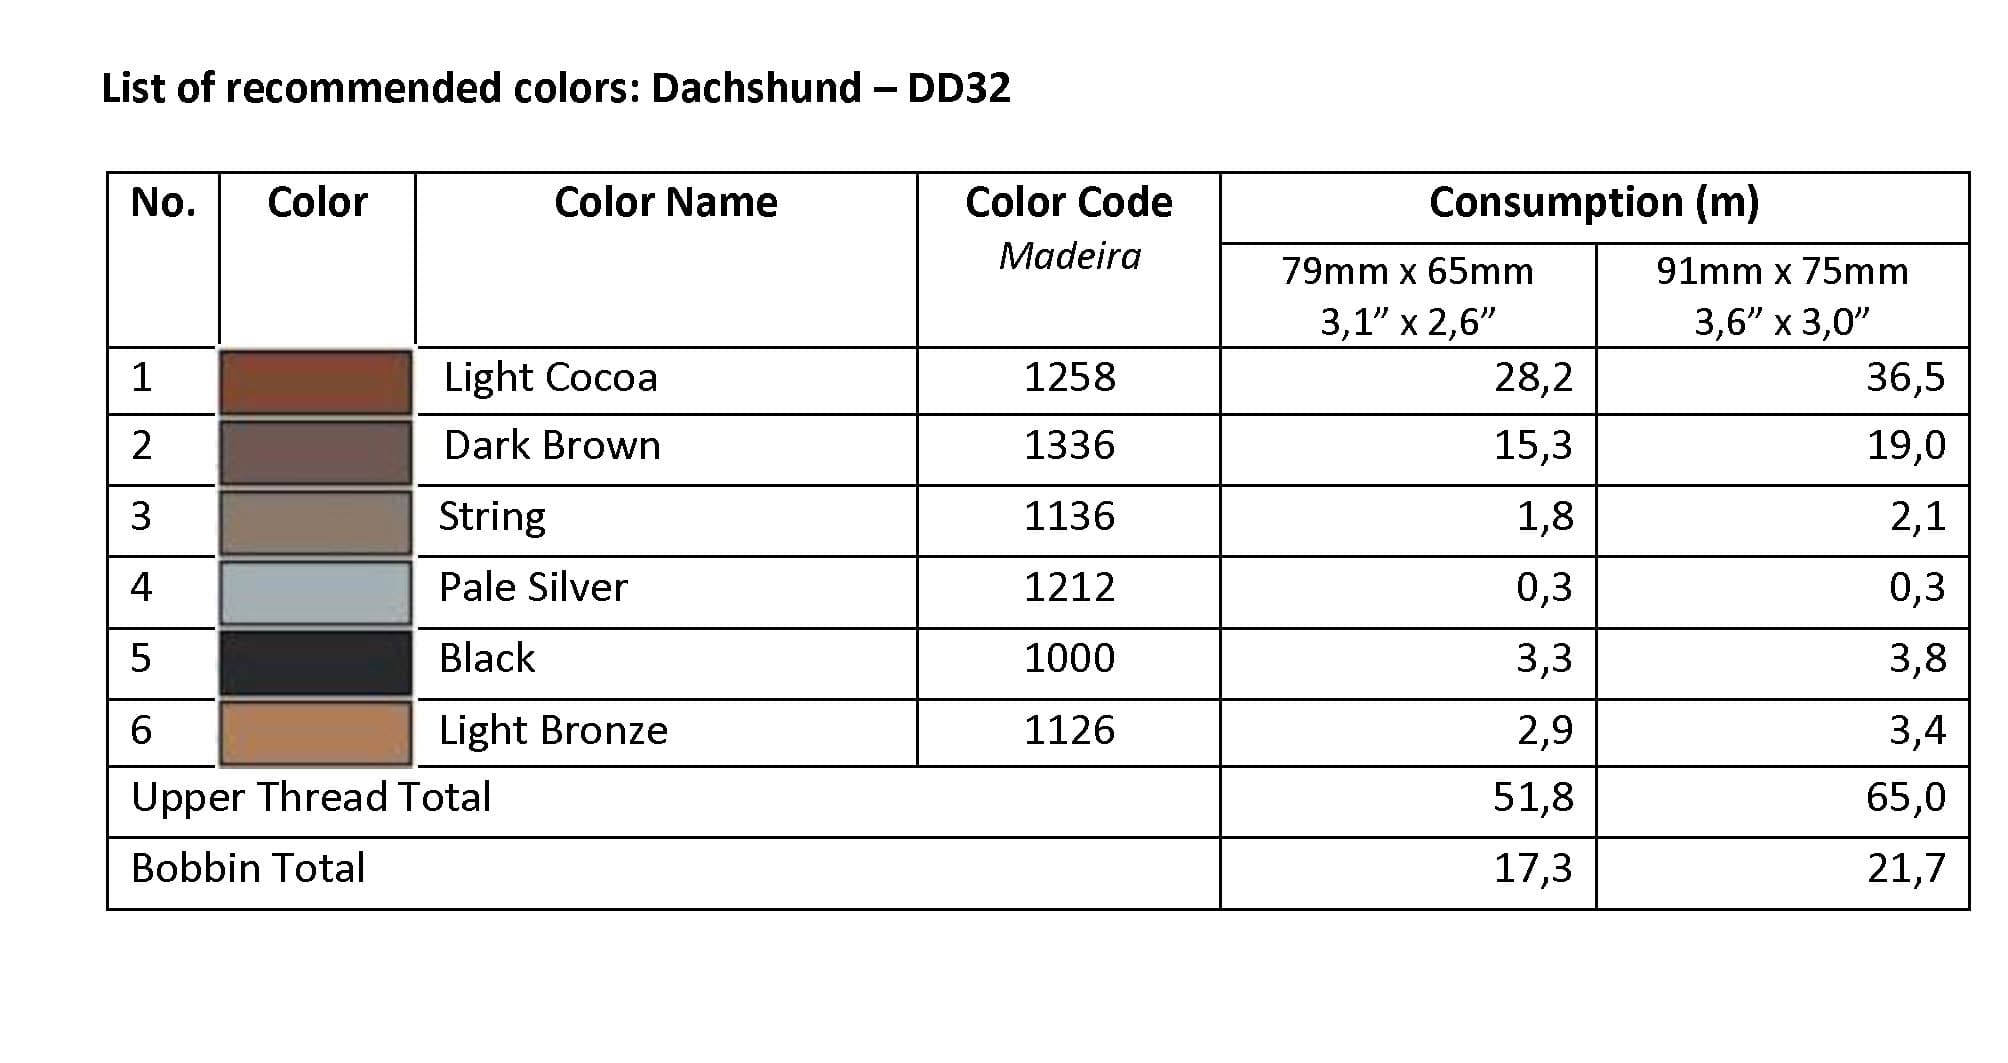 List of Recommended Colors - Dachshund DD32